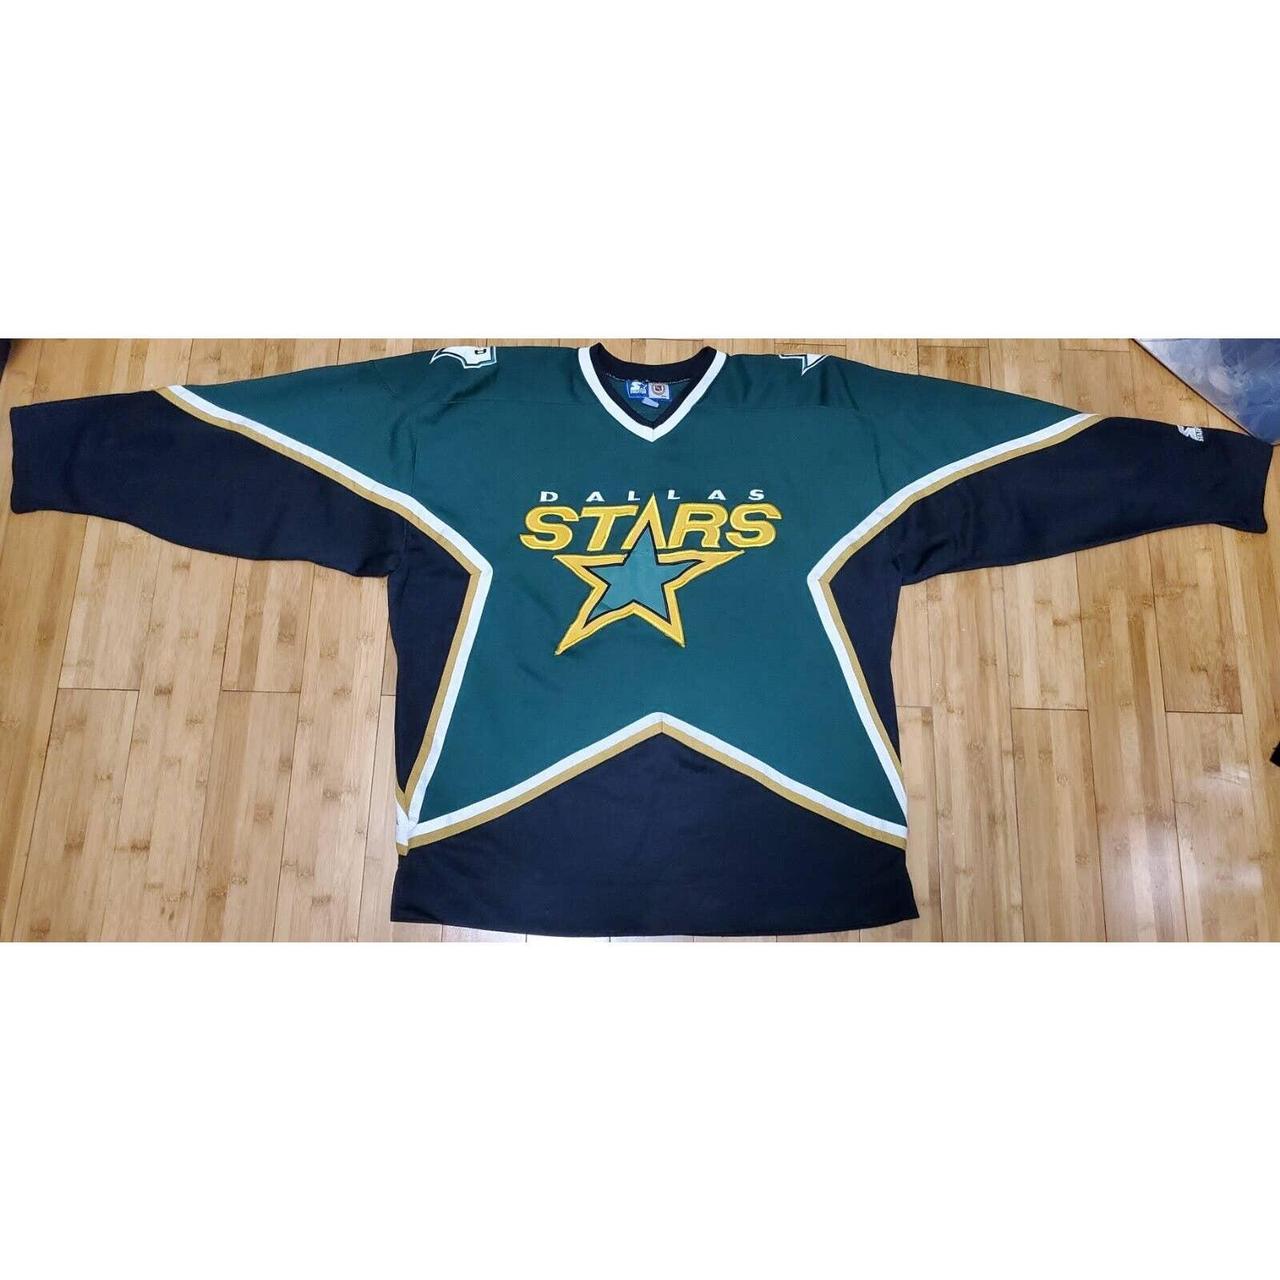 Vintage 90s Dallas Stars Starter Team Jersey Green Men's Stitched NHL  Hockey XL., Condition: Pre-owned, in excellent condition! for Sale in  Sachse, TX